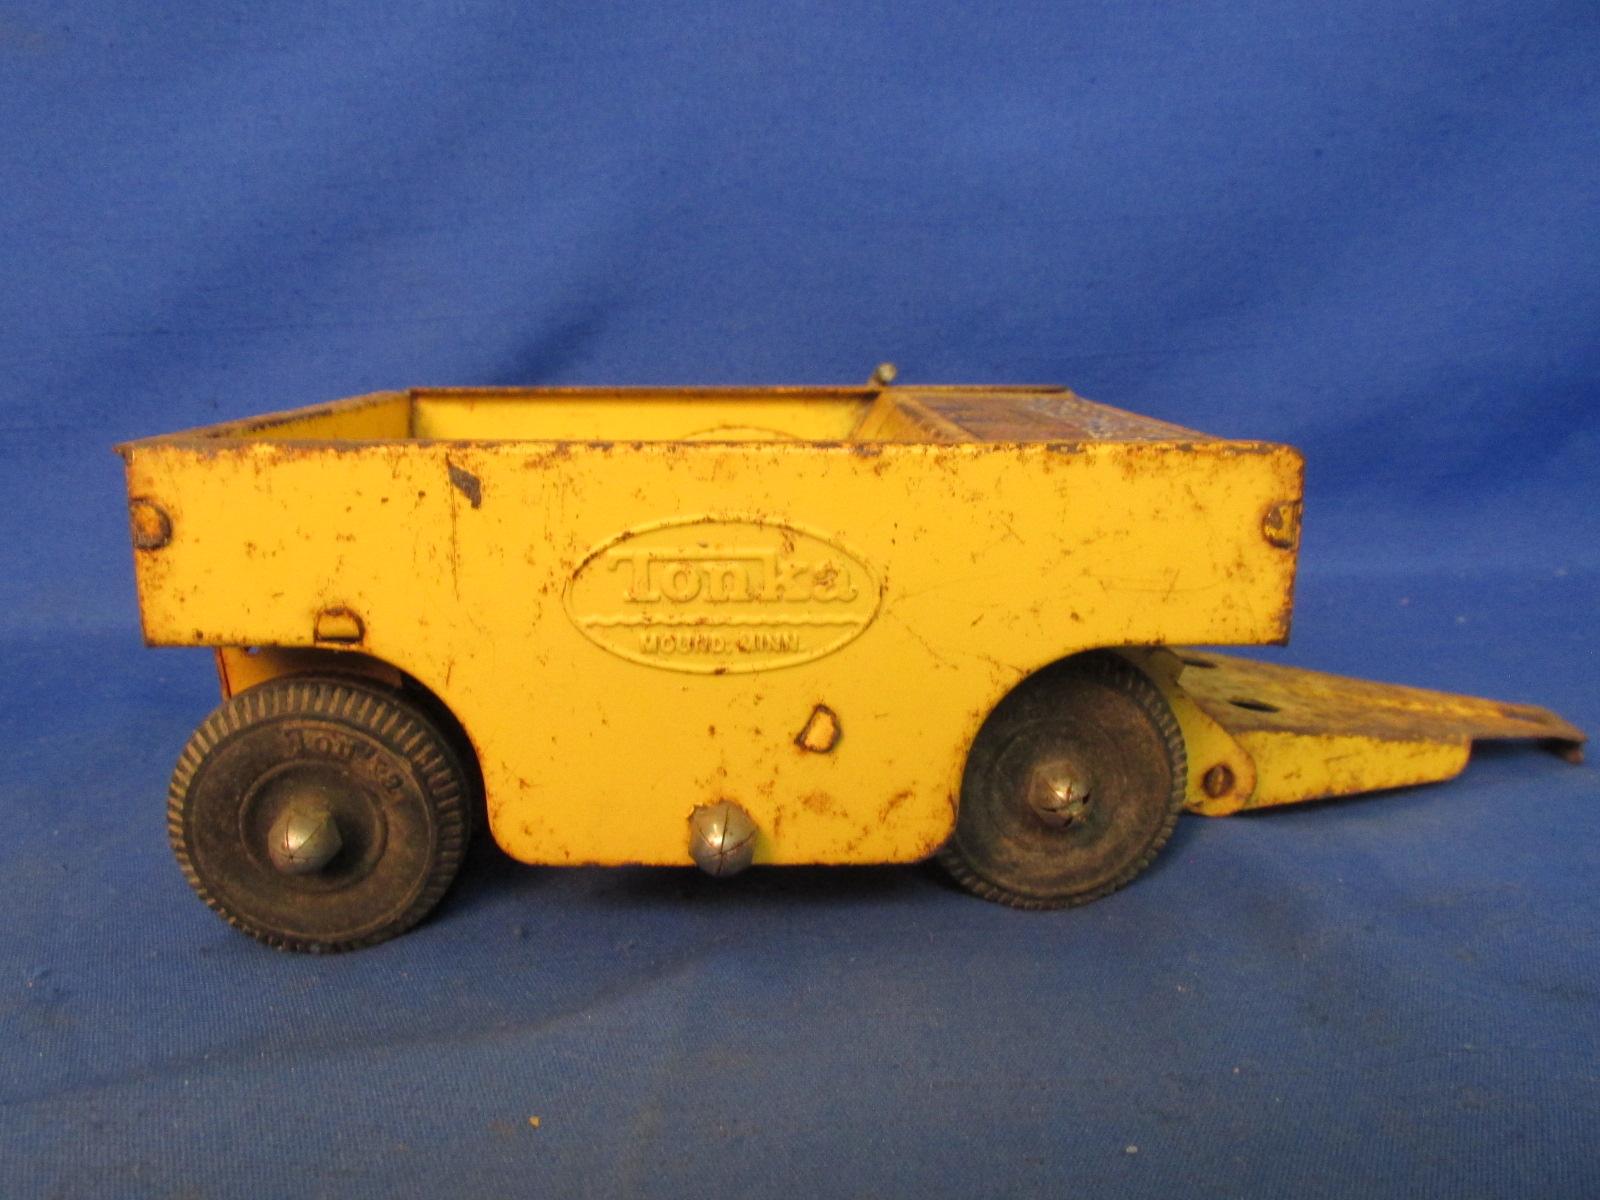 Vintage Tonka Highway Spread Pack Trailer Yellow 1960's  10” L, Box 6 ¼ x 5 1/4” x 3” T